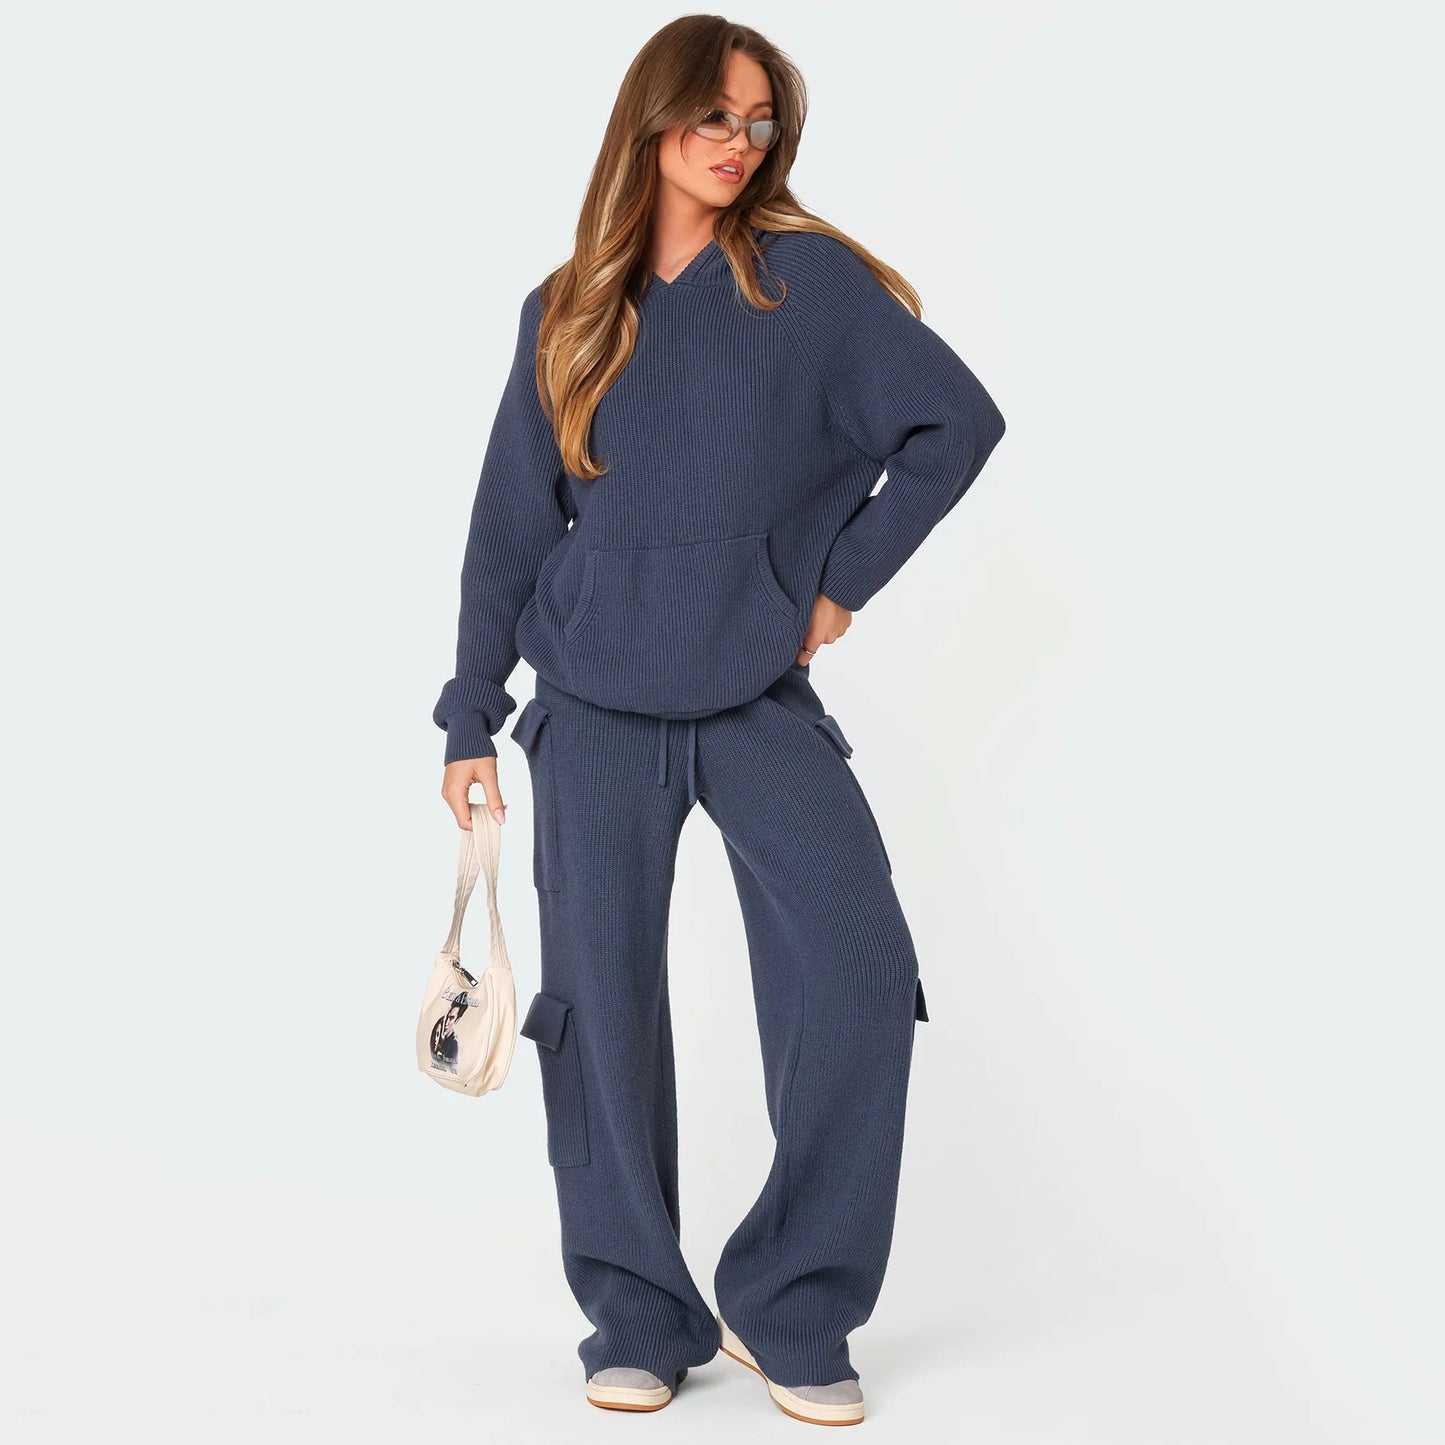 Hooded Sports And Leisure Sweaters Suit